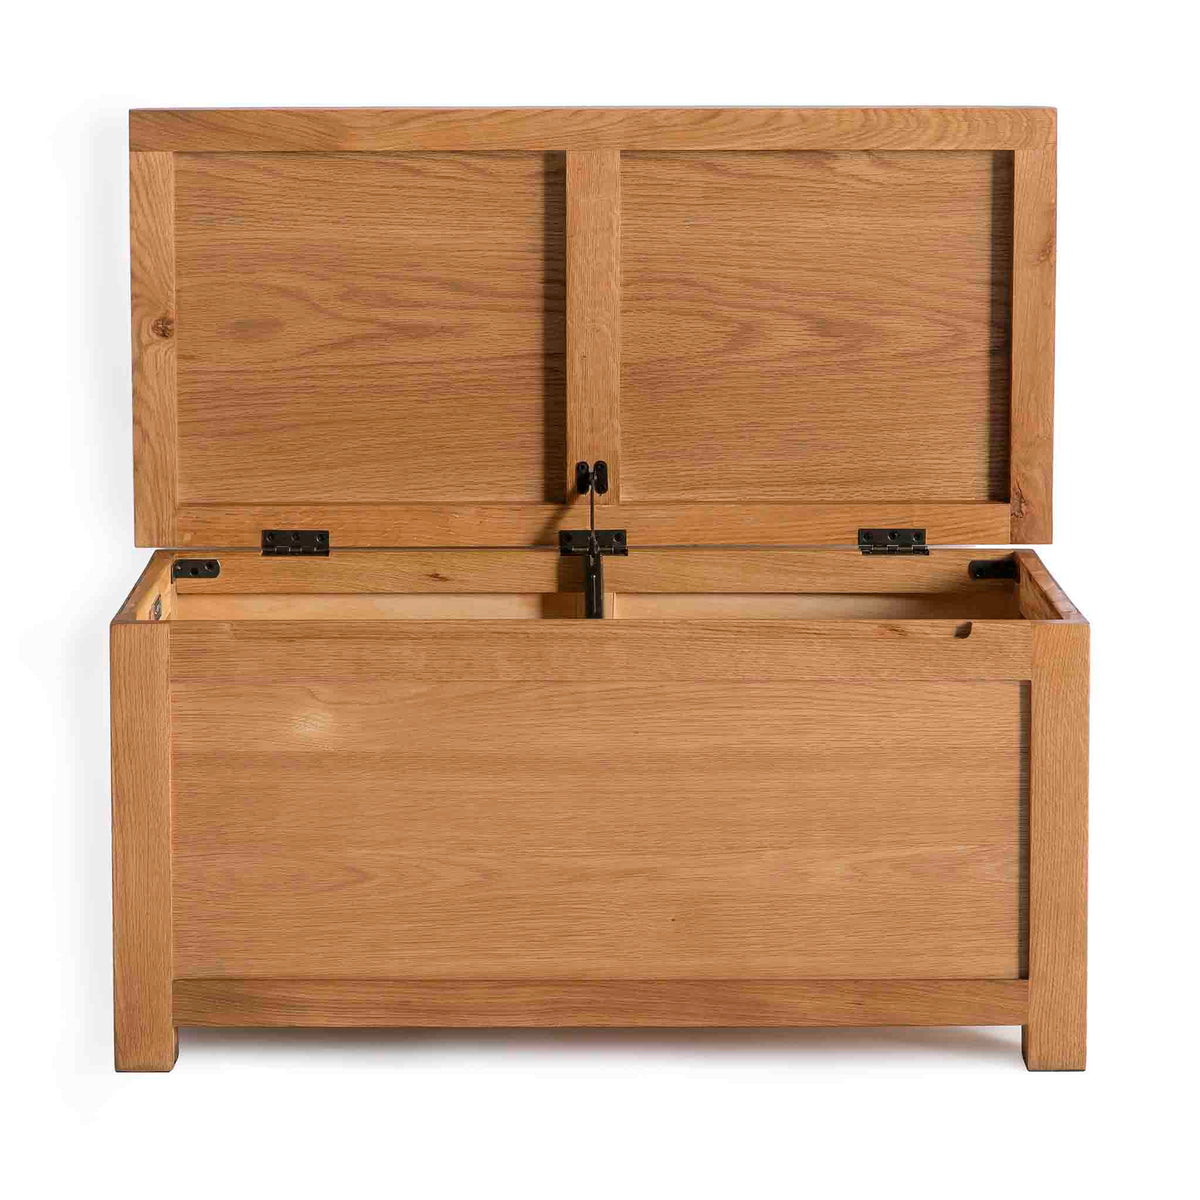 Surrey Oak Blanket Box / Ottoman - Front view with lid open